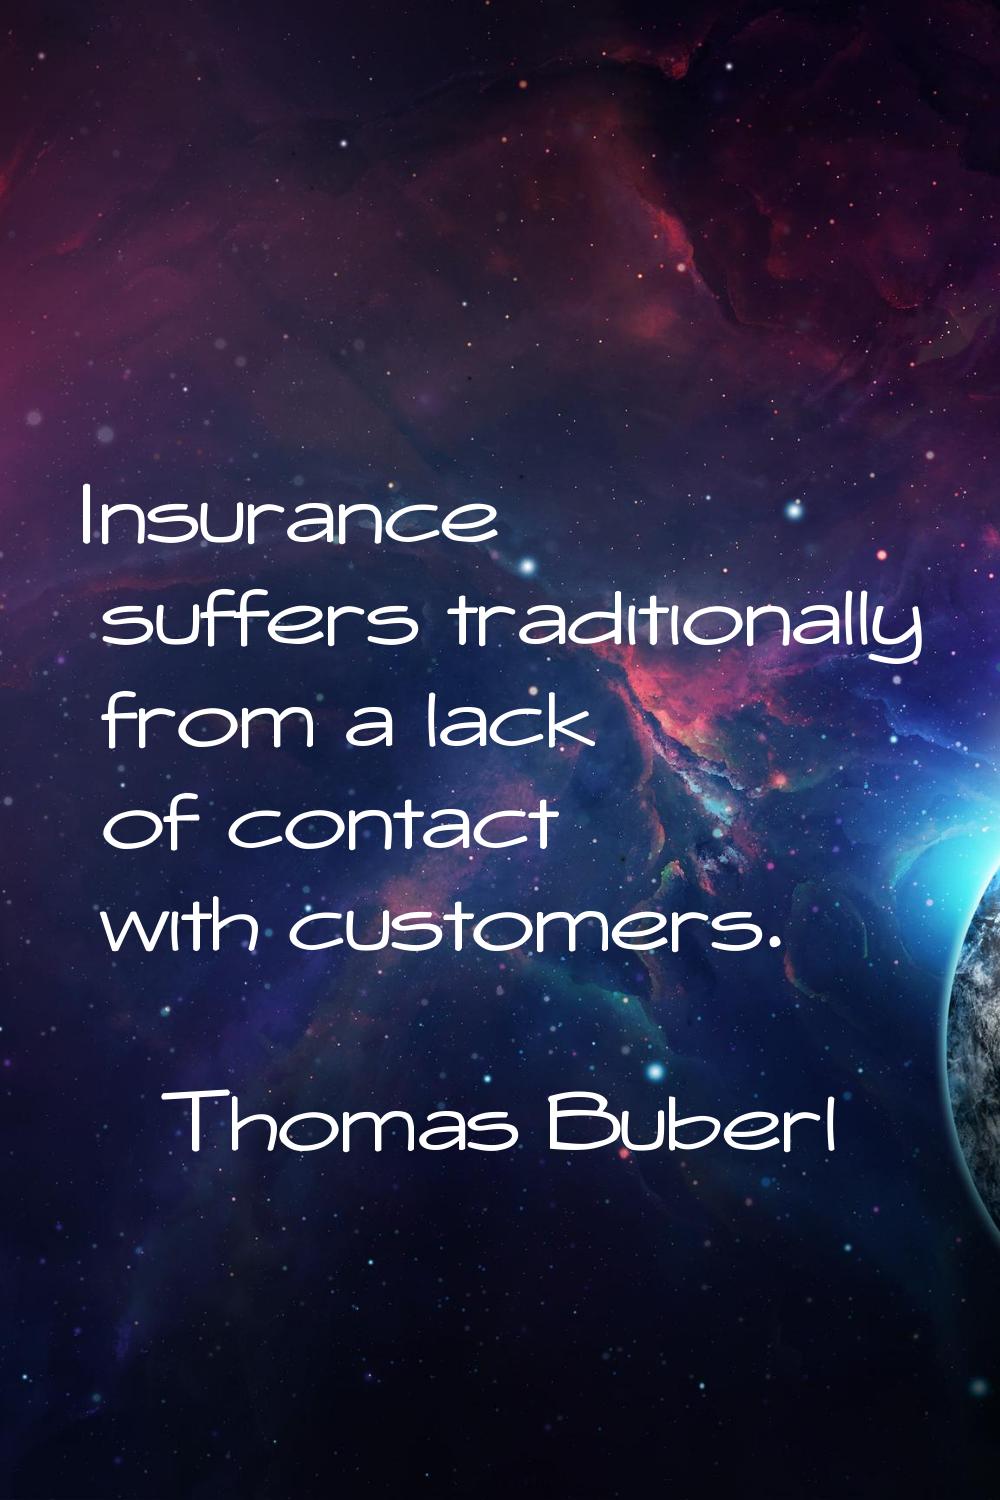 Insurance suffers traditionally from a lack of contact with customers.